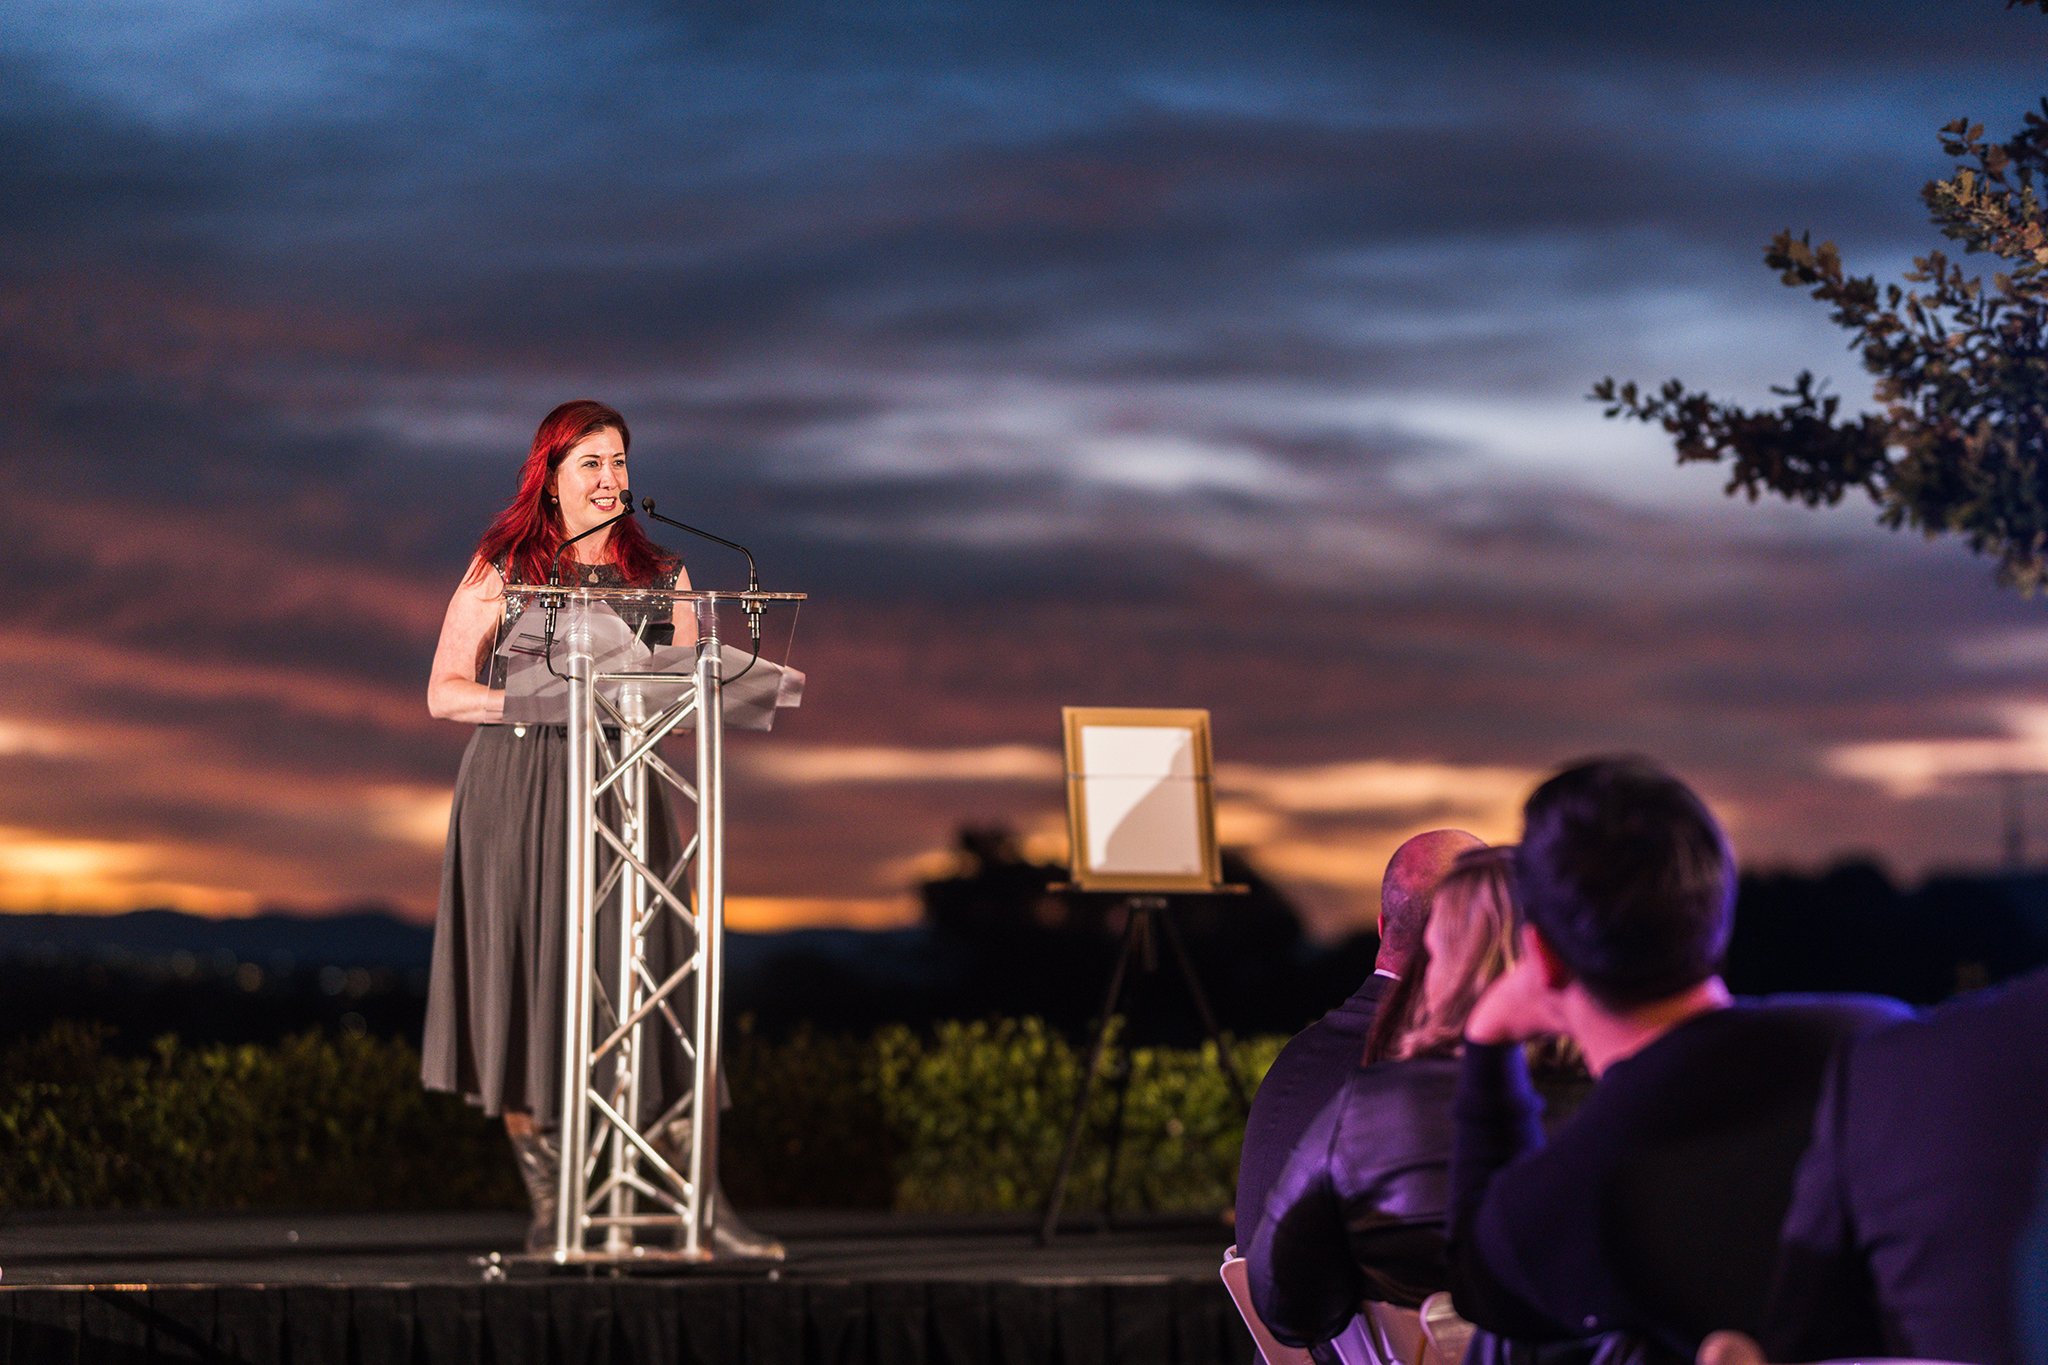 Canberra Event Photography - Woman Speaks at Sunset